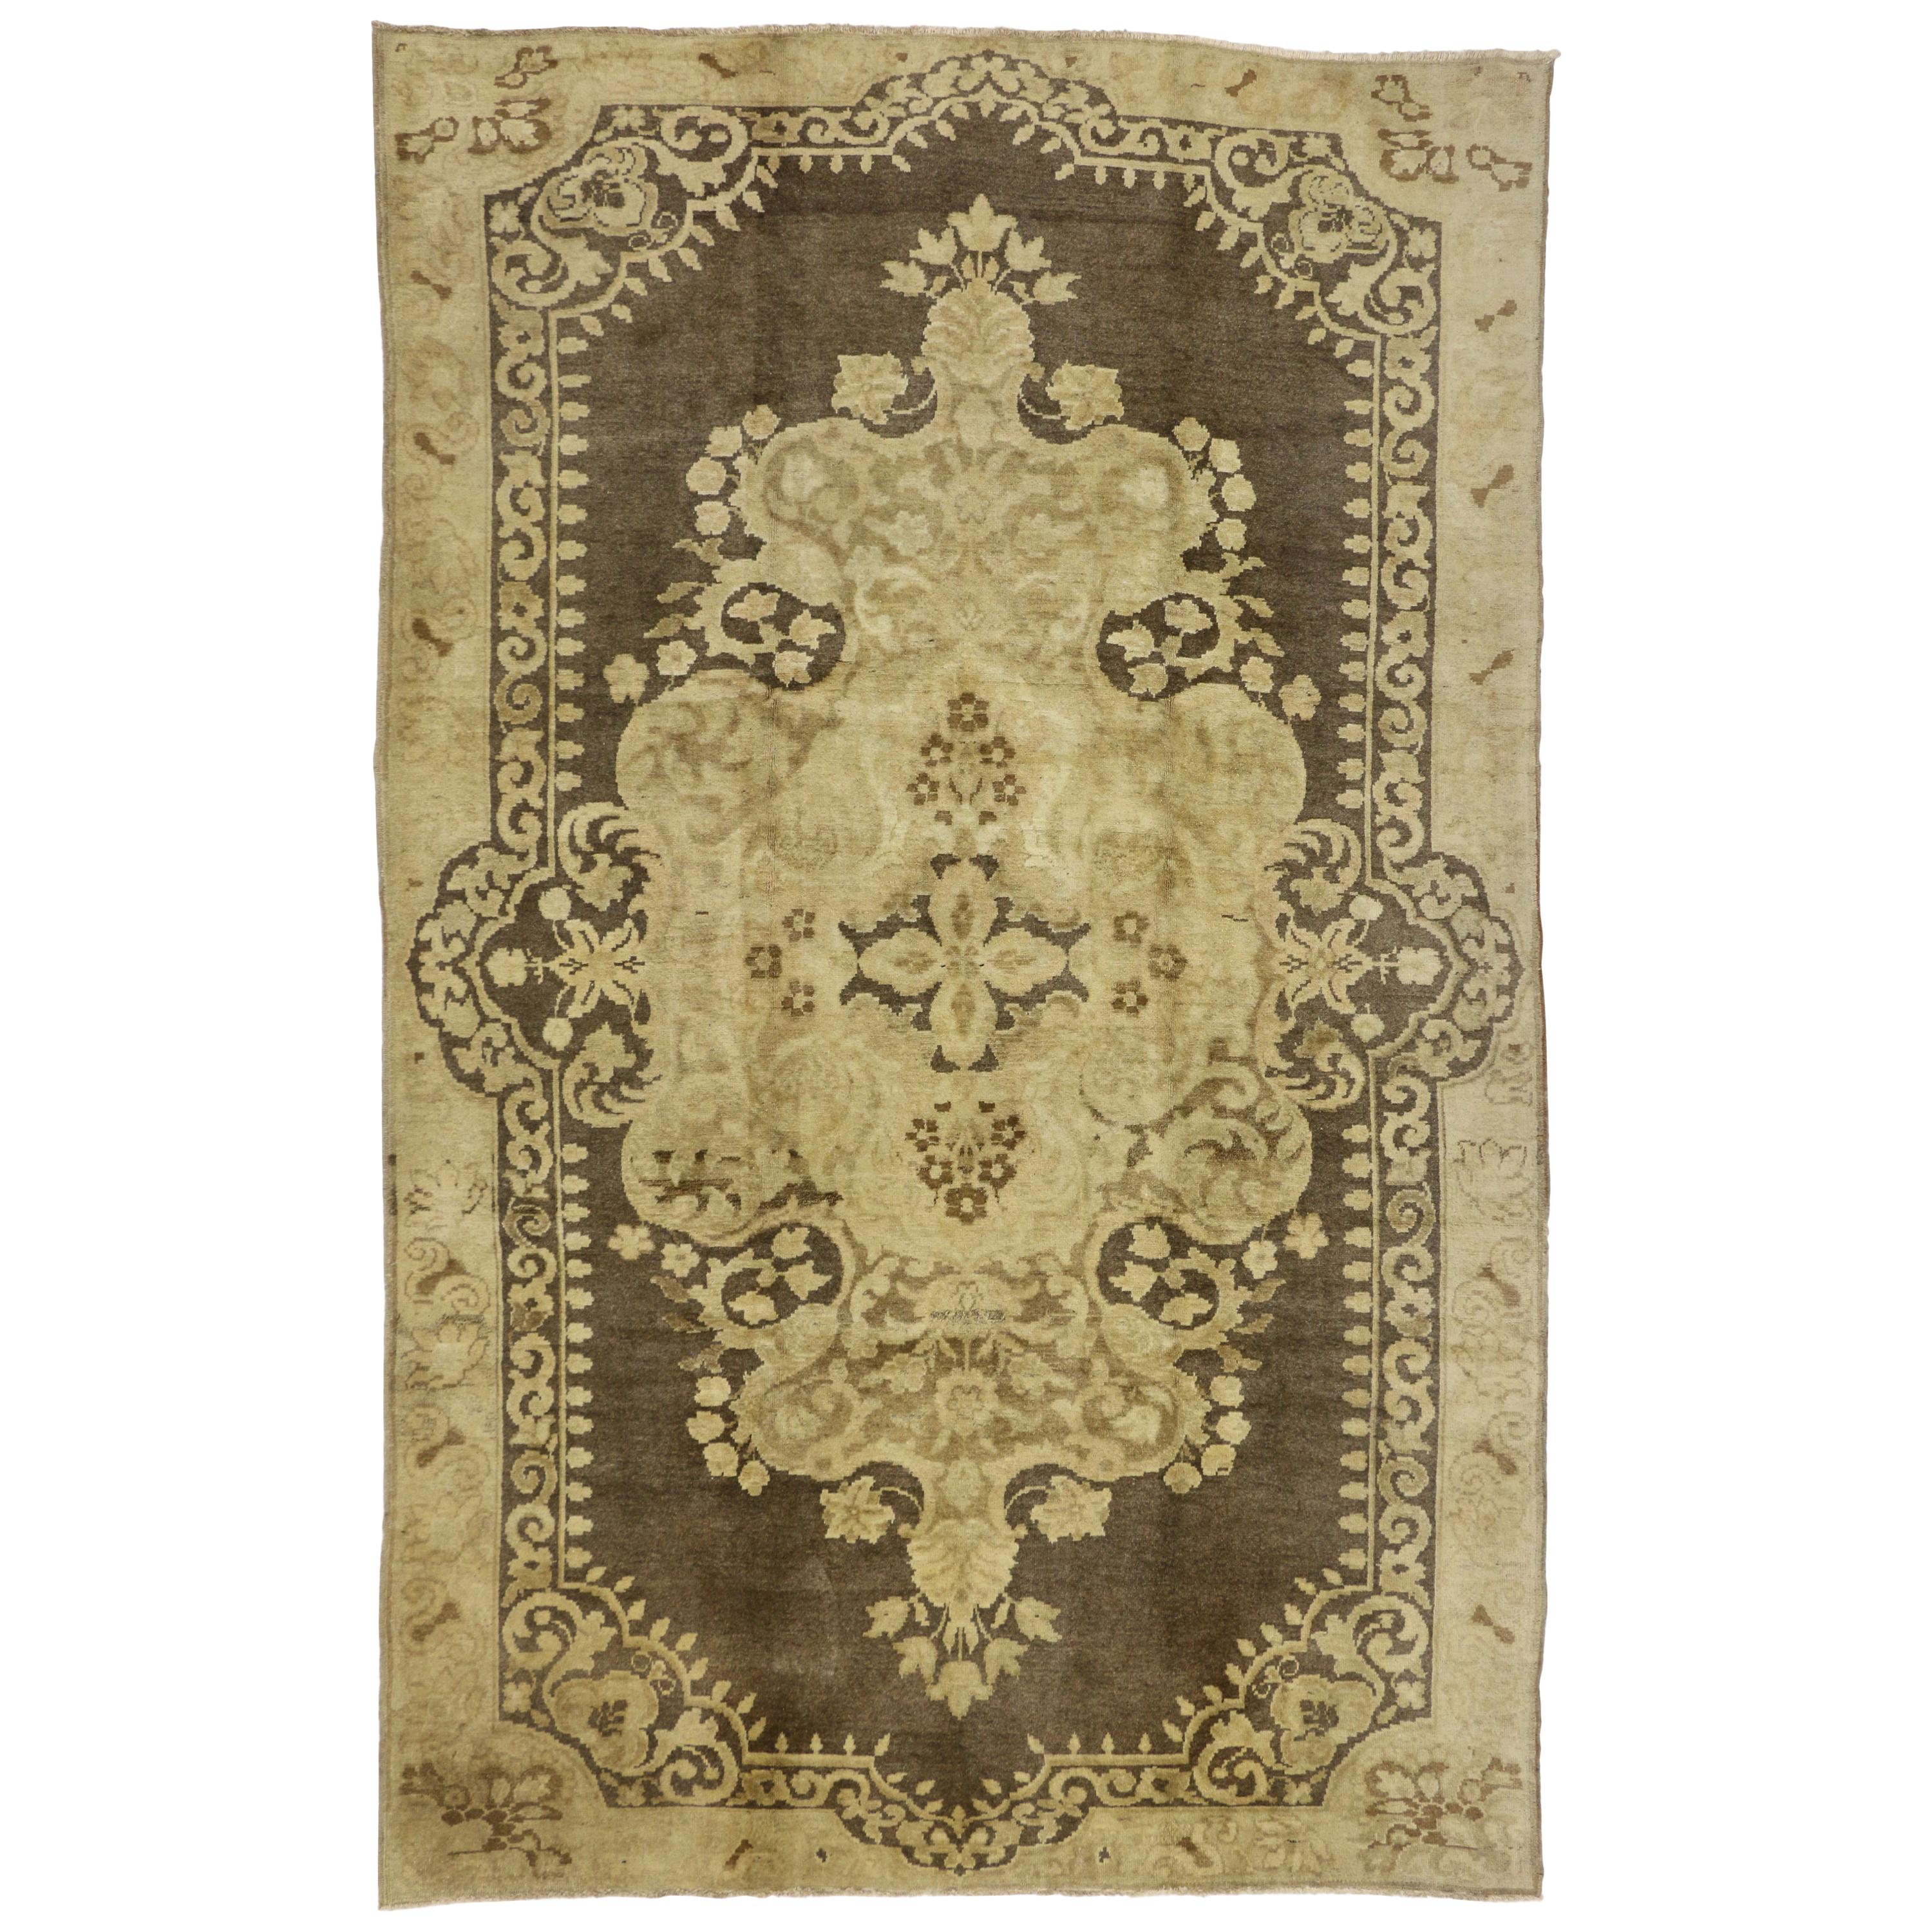 Vintage Turkish Oushak Rug with Warm, Neutral Colors